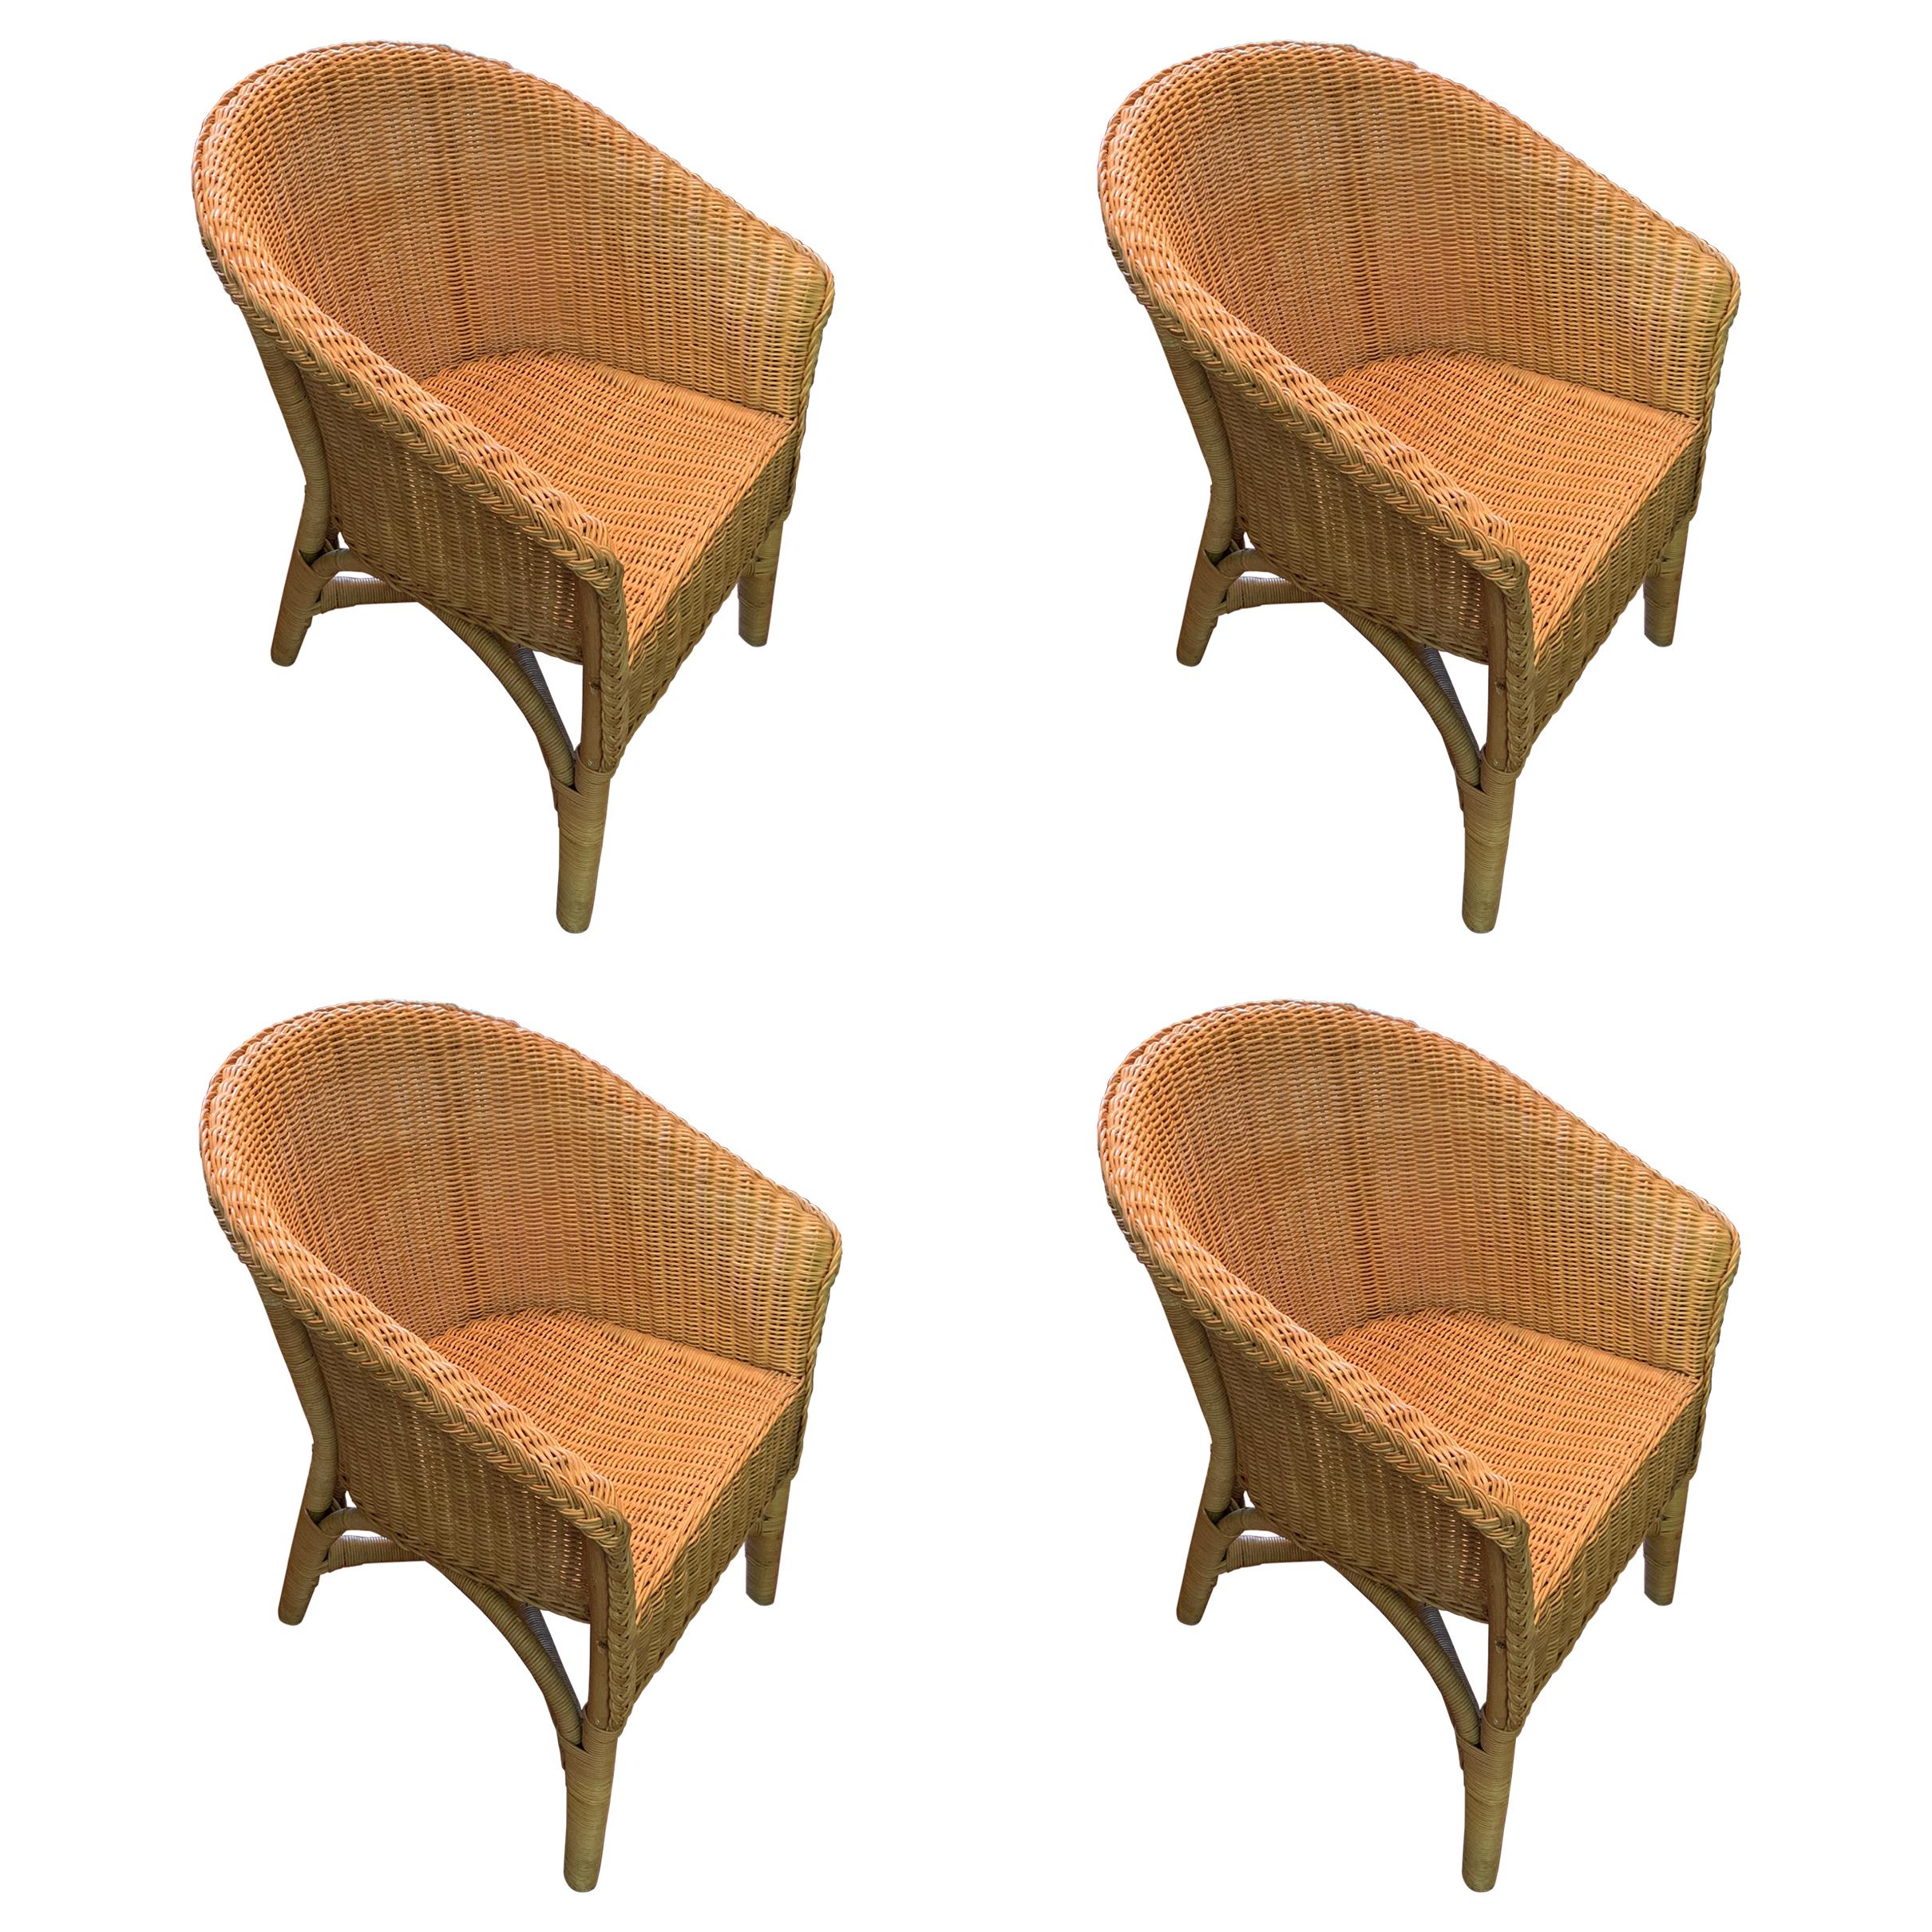 Set of Four Wicker Dining Chairs, Contemporary